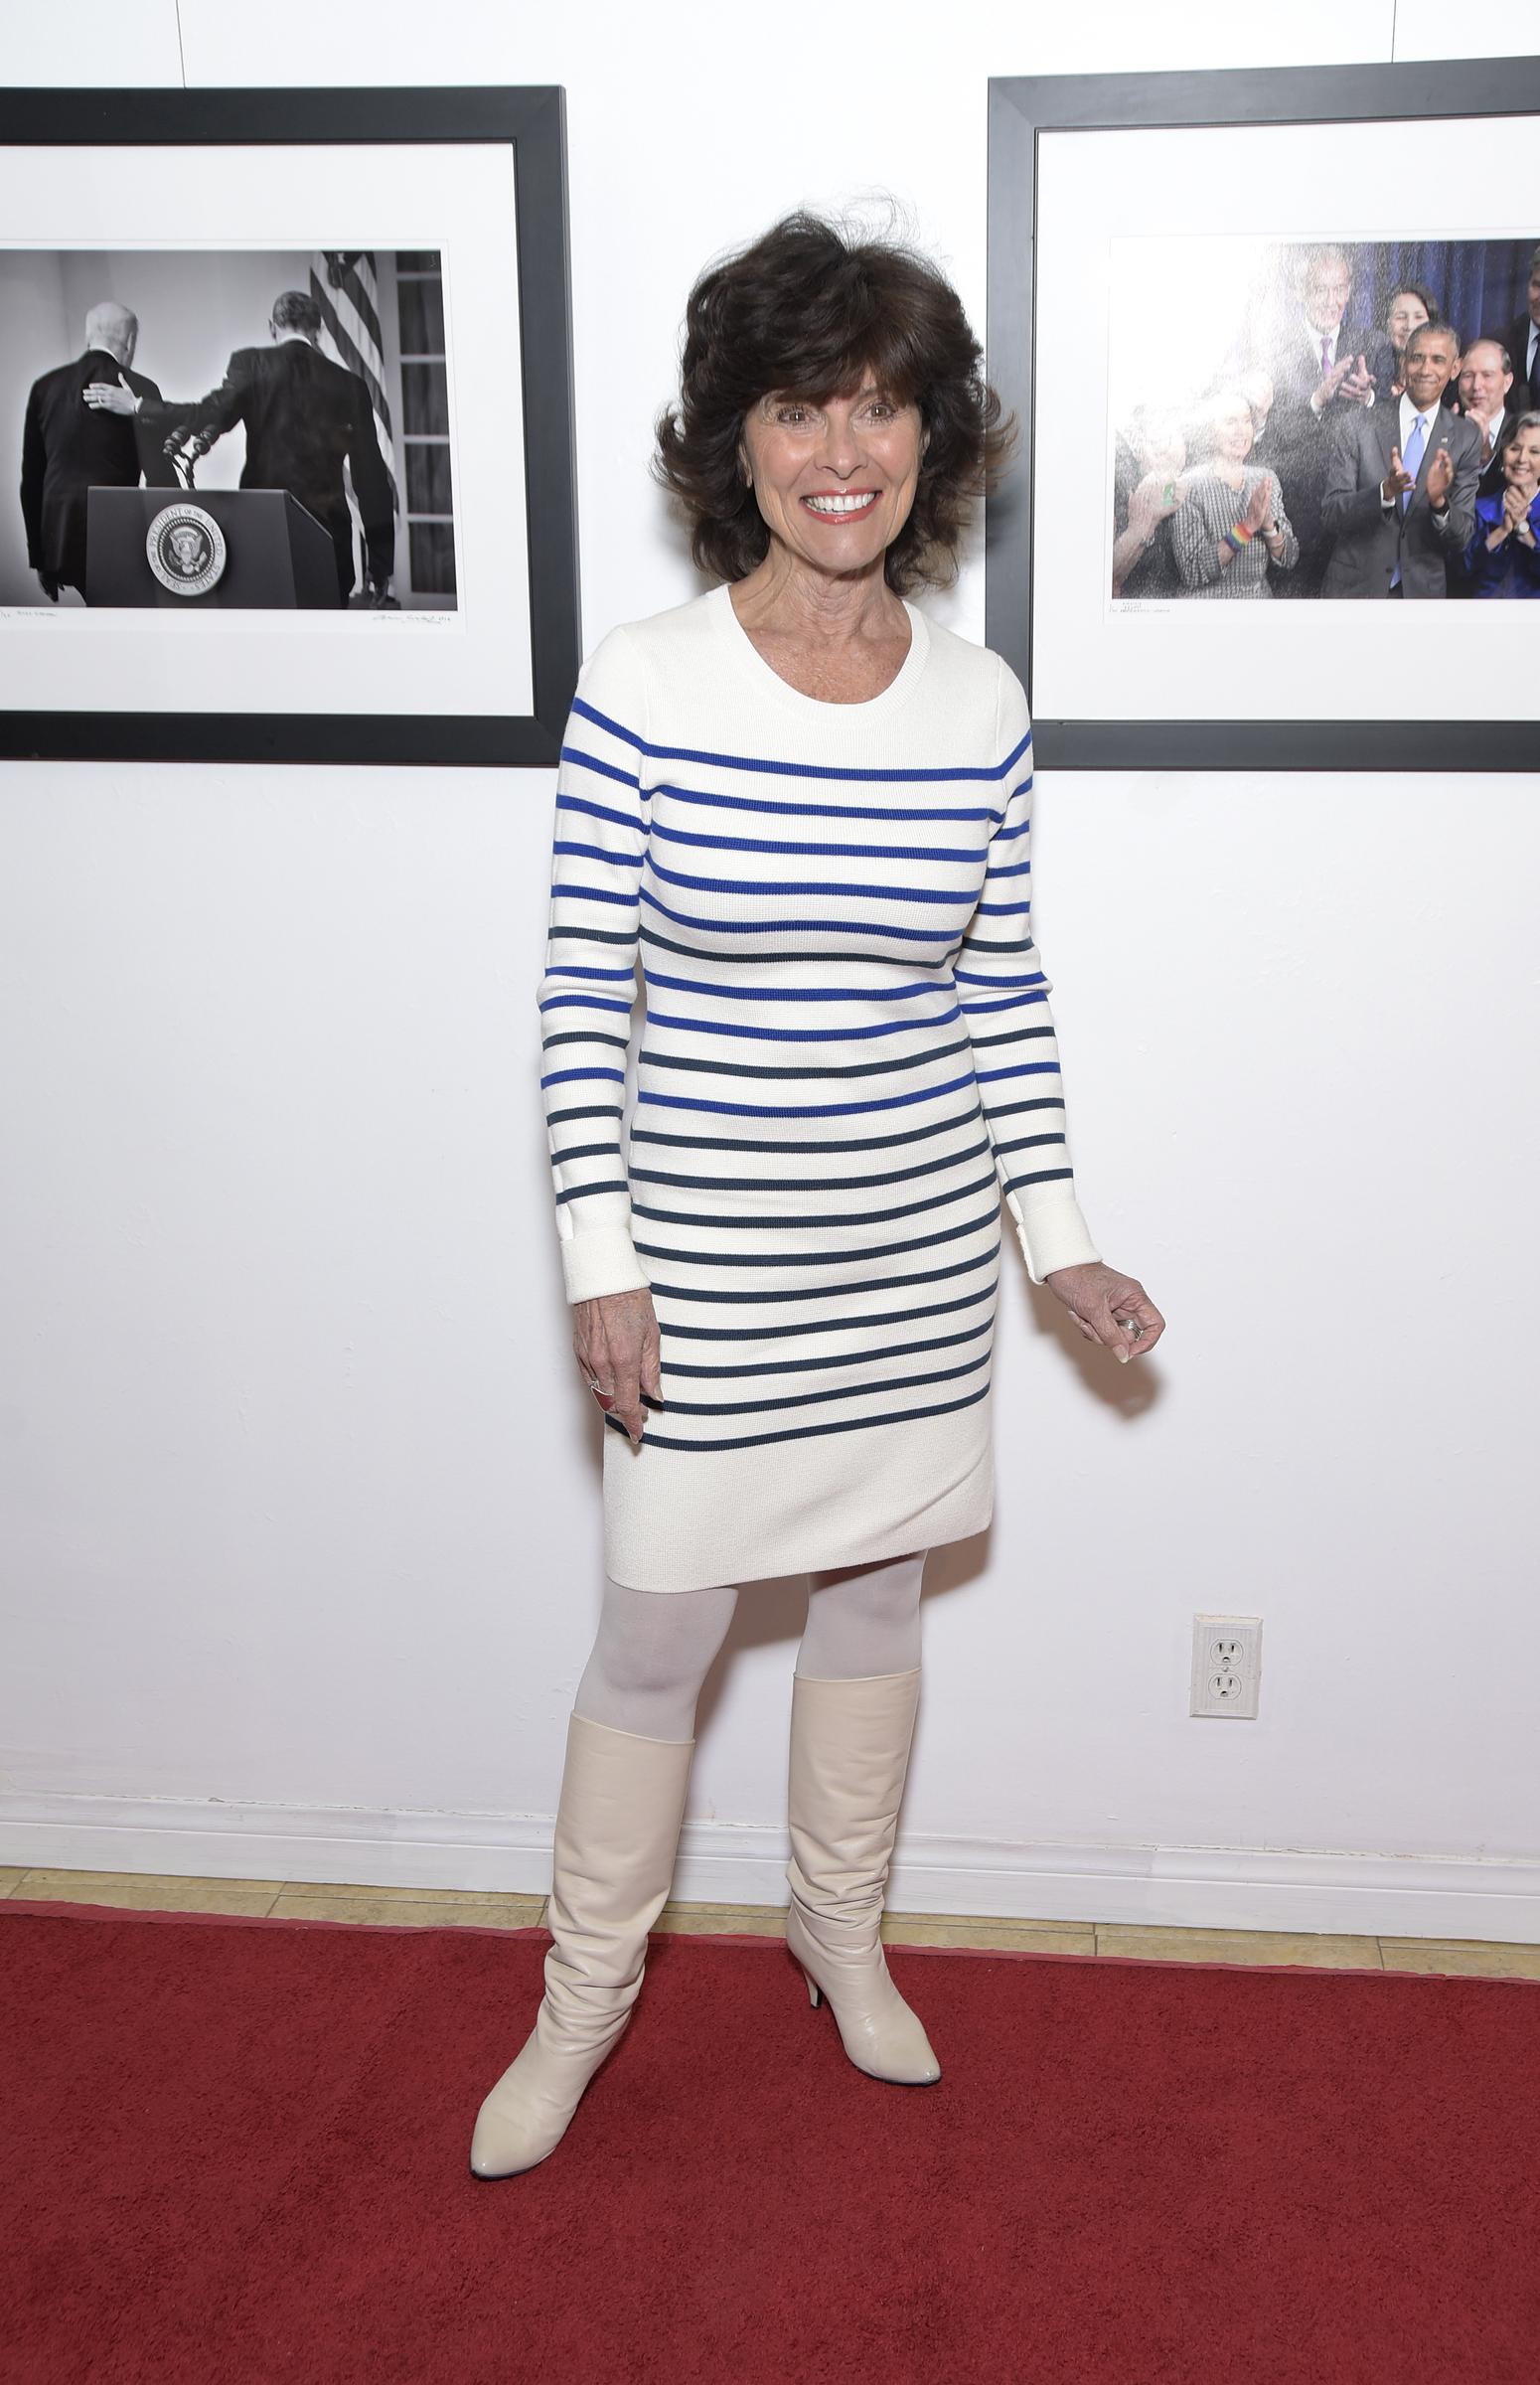 Adrienne Barbeau on February 17, 2019 in Alhambra, California | Source: Getty Images